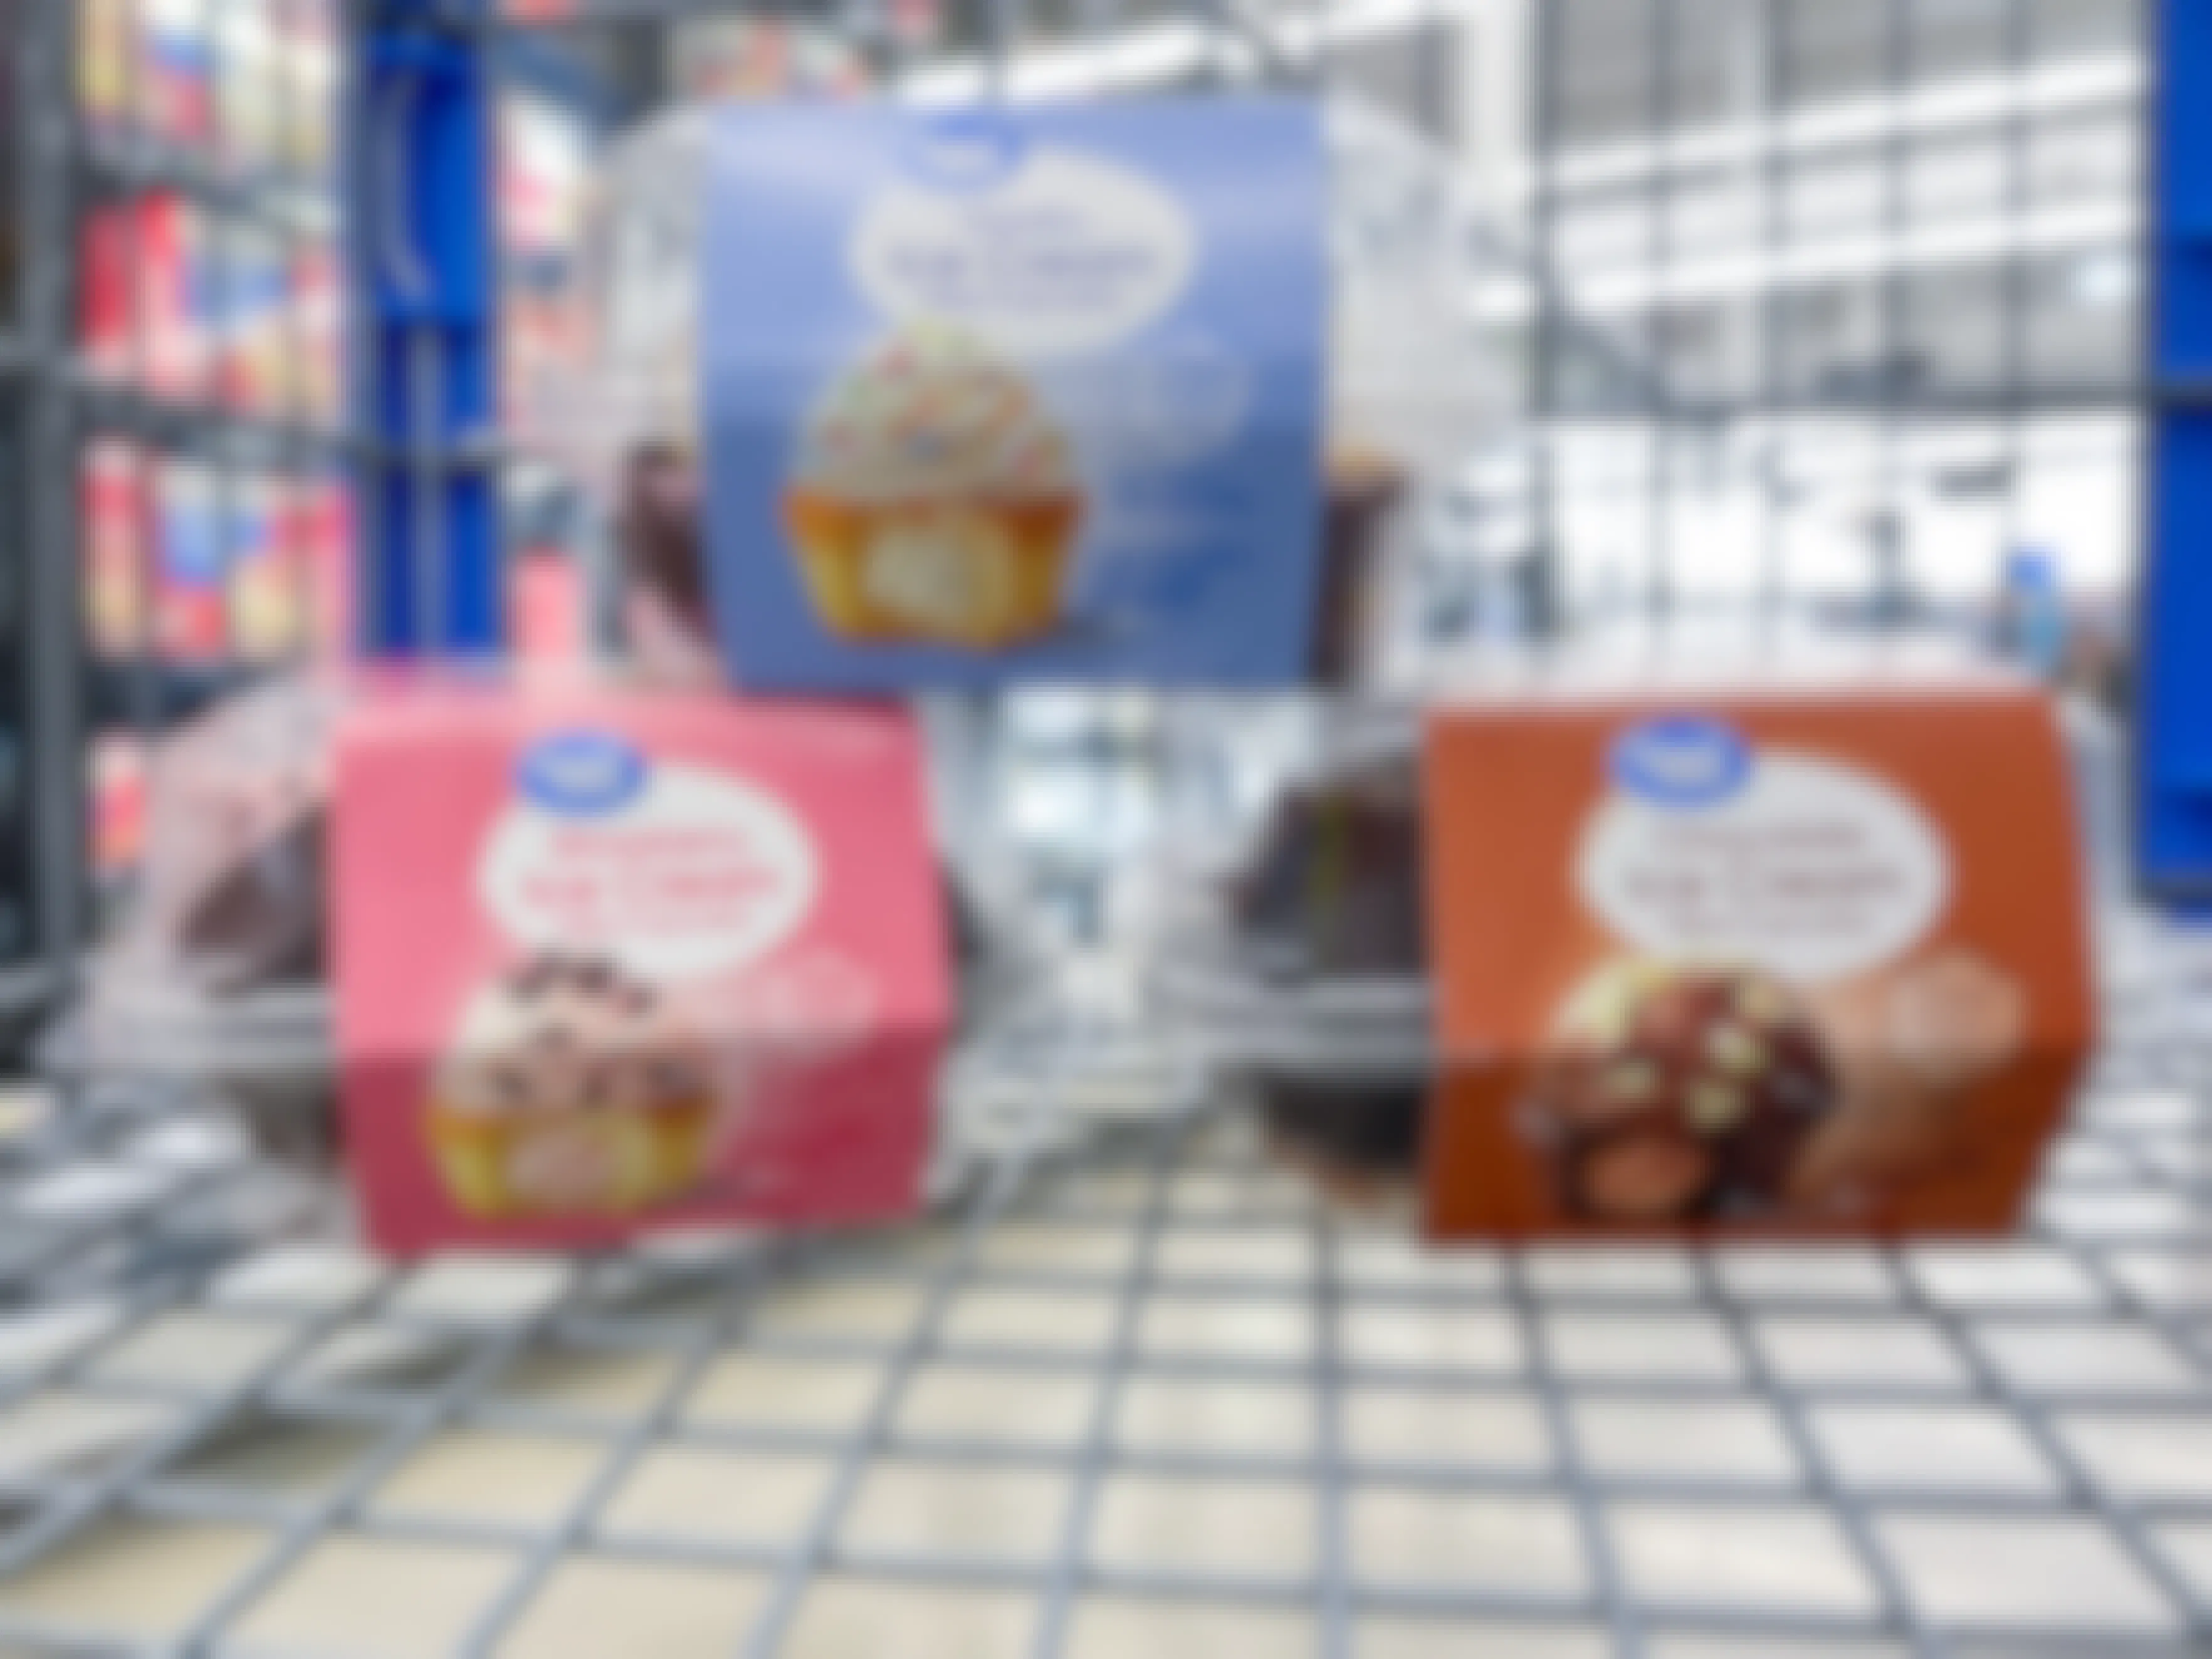 Three packs of Great Value Ice Cream Filled Cupcakes in a Walmart shopping cart: Vanilla, Chocolate, and Strawberry flavors